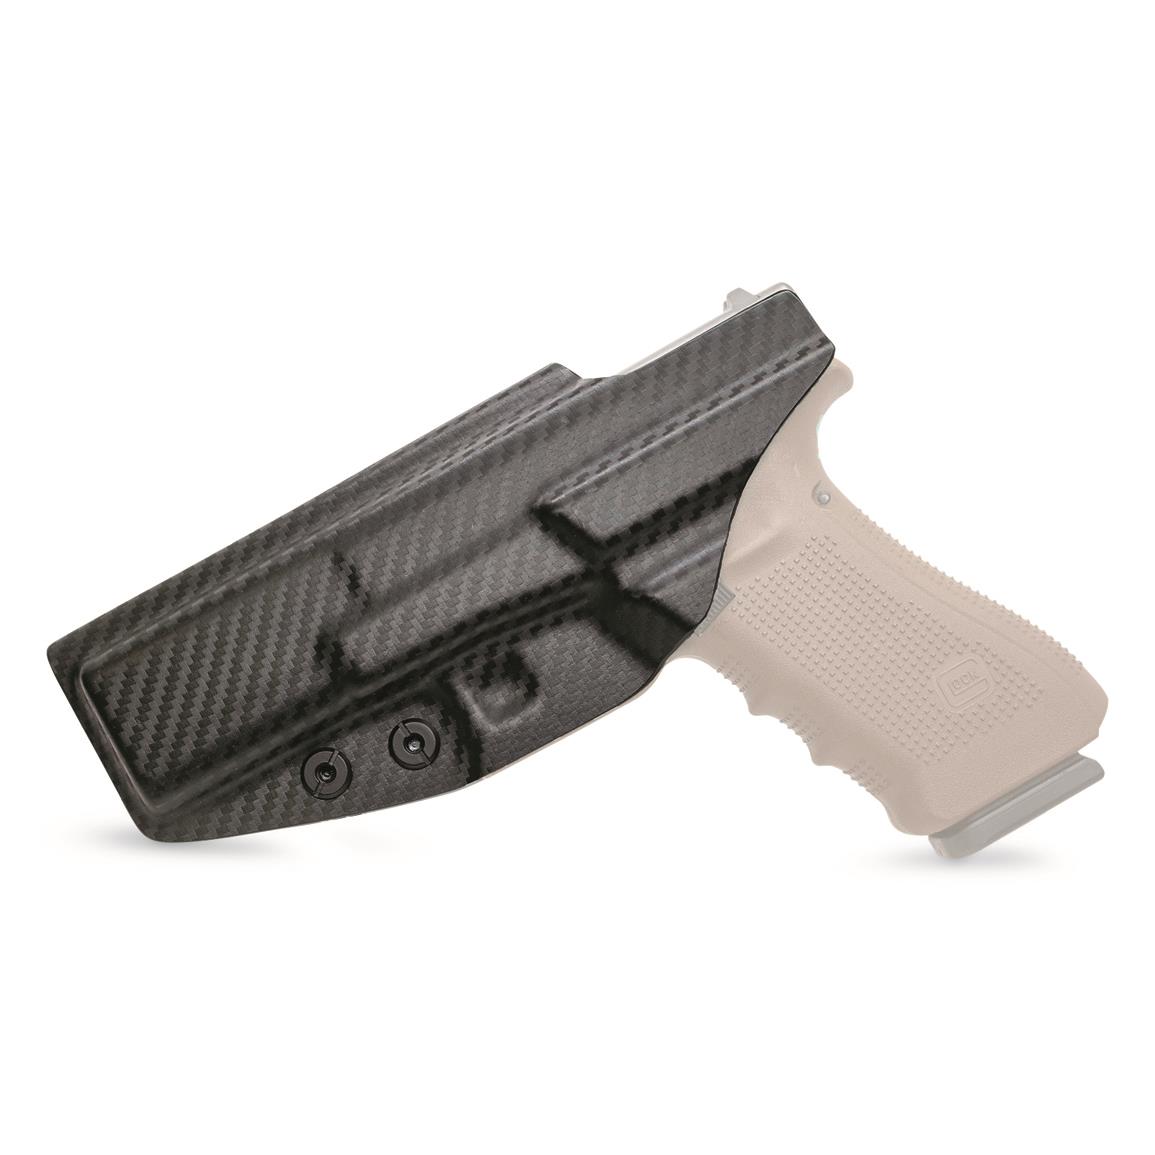 FITS Glock 17/19/19x/22/23/31/32/44/45 Holster IWB kydex With Mag Carrier 